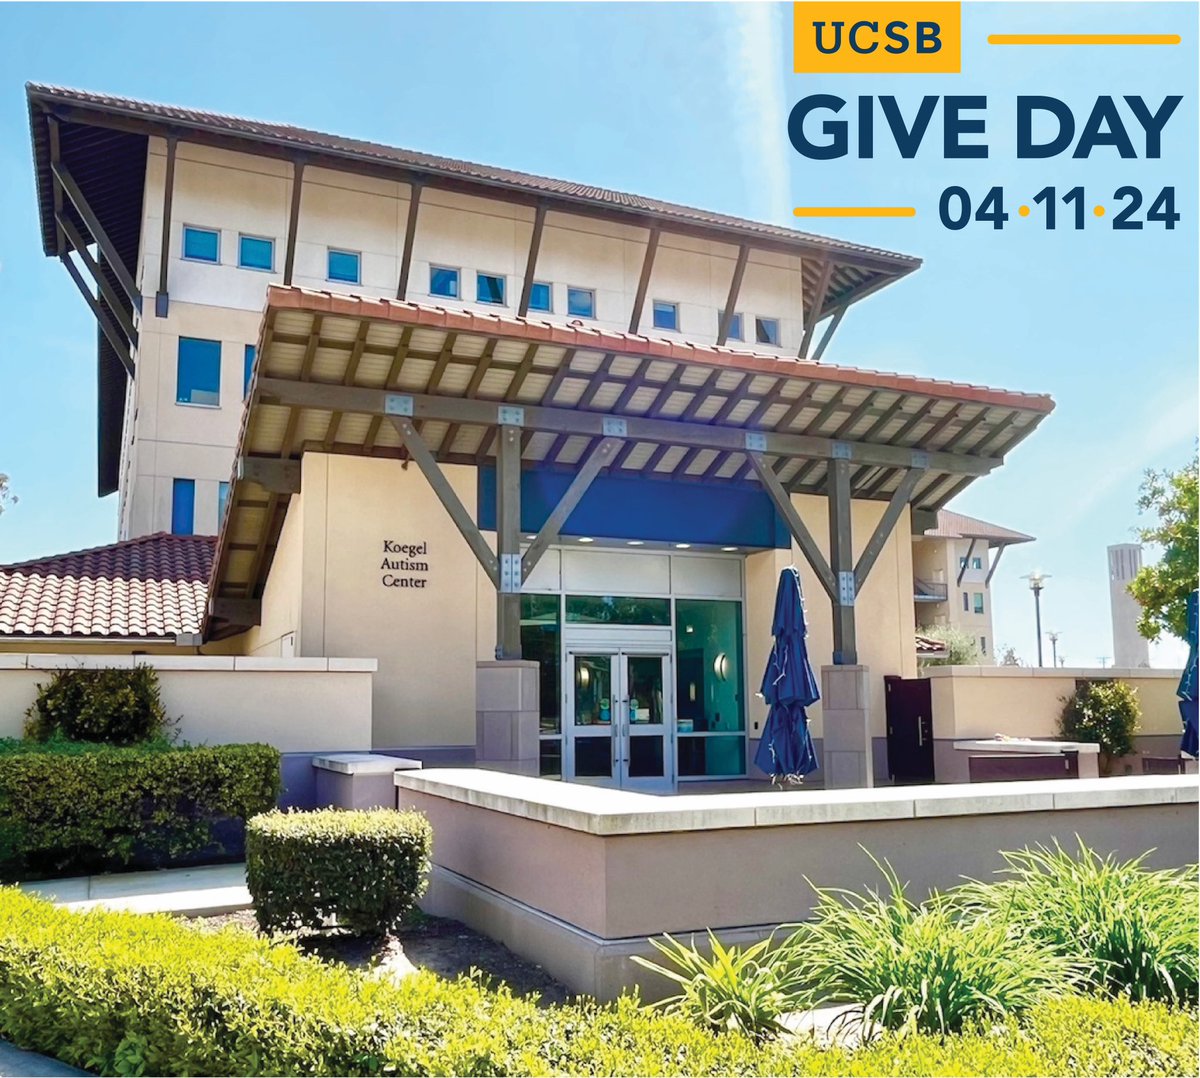 The Autism Center needs your support. Thanks to the generosity of Scott and Kelly Trueman, we have $13,000 in matching dollars available to double your gift to the Autism Center today!  ucsb.scalefunder.com/gday/giving-da… #UCSBGiveDay